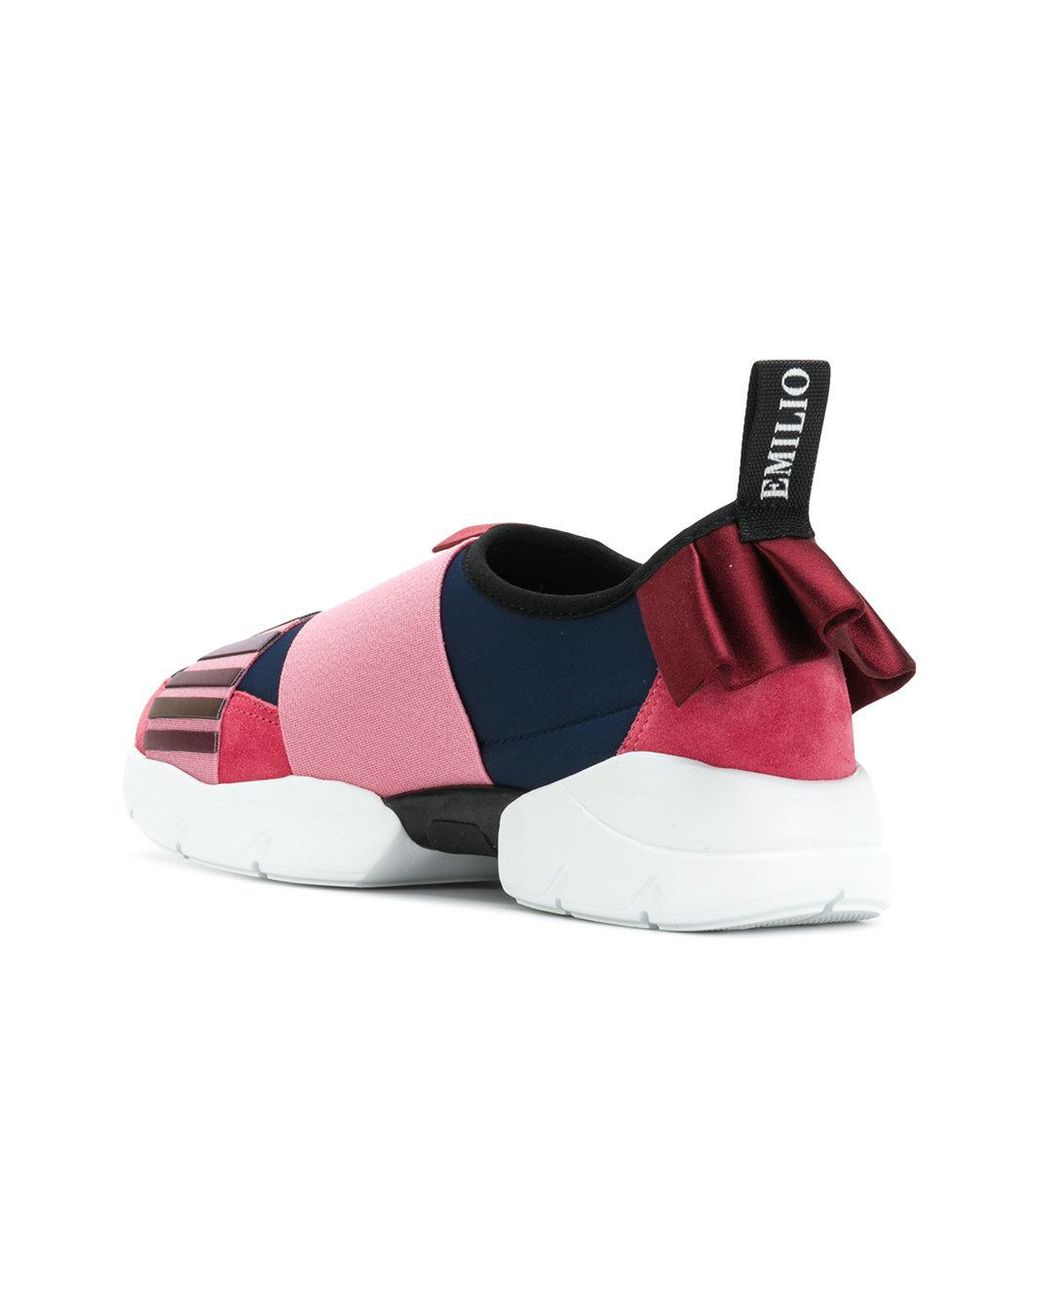 Emilio Pucci Synthetic Low Ruffle Sneakers in Pink & Purple (Pink) | Lyst